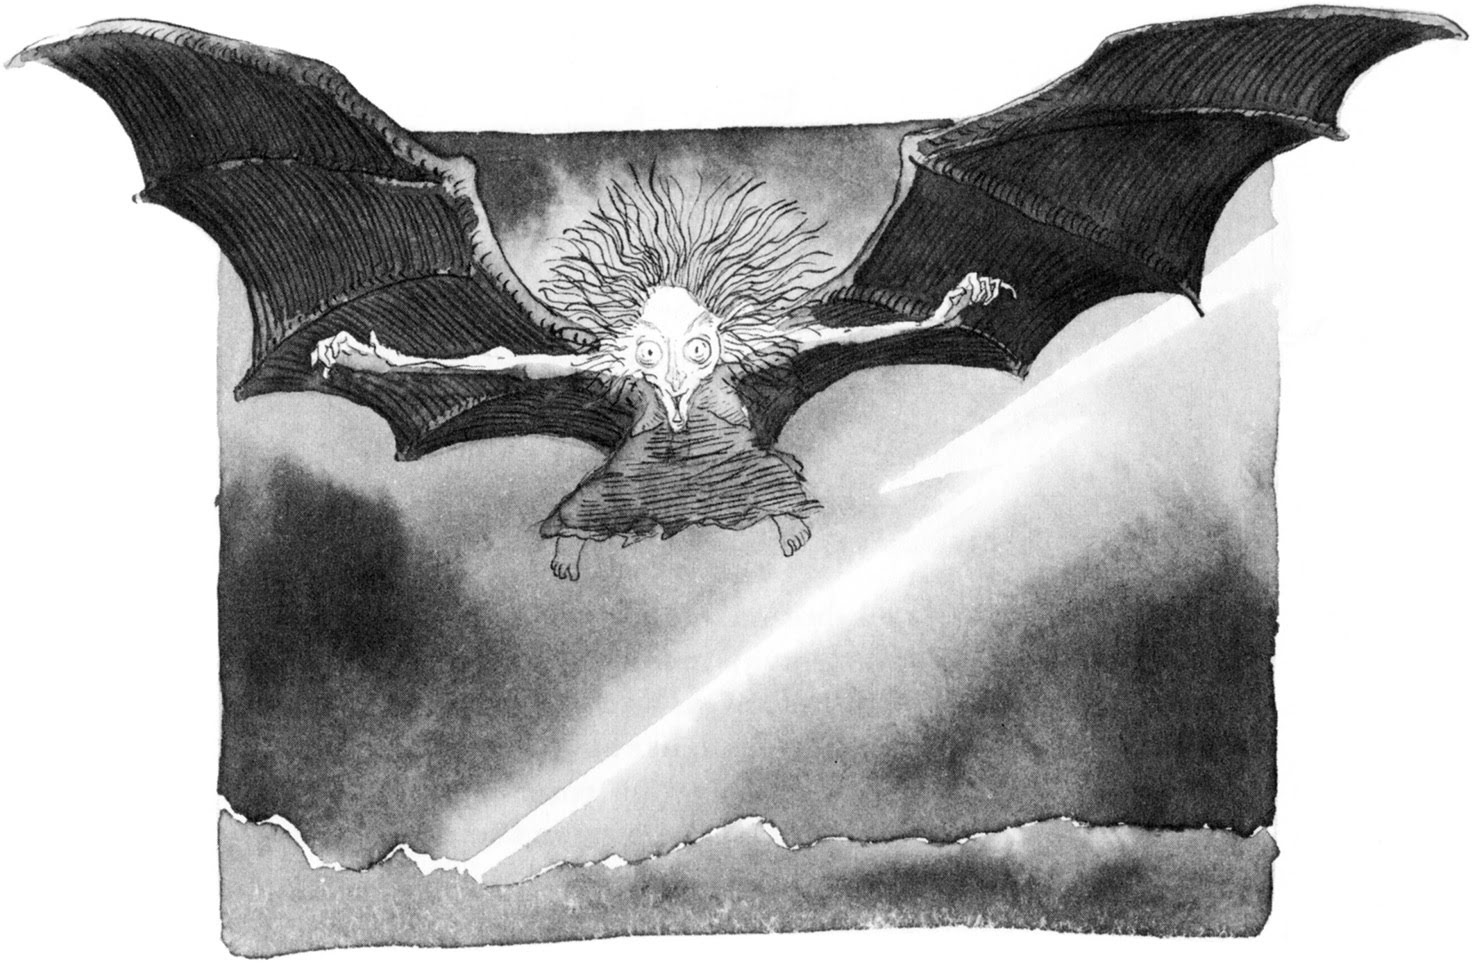 Harpy illustration from The Tempest, by